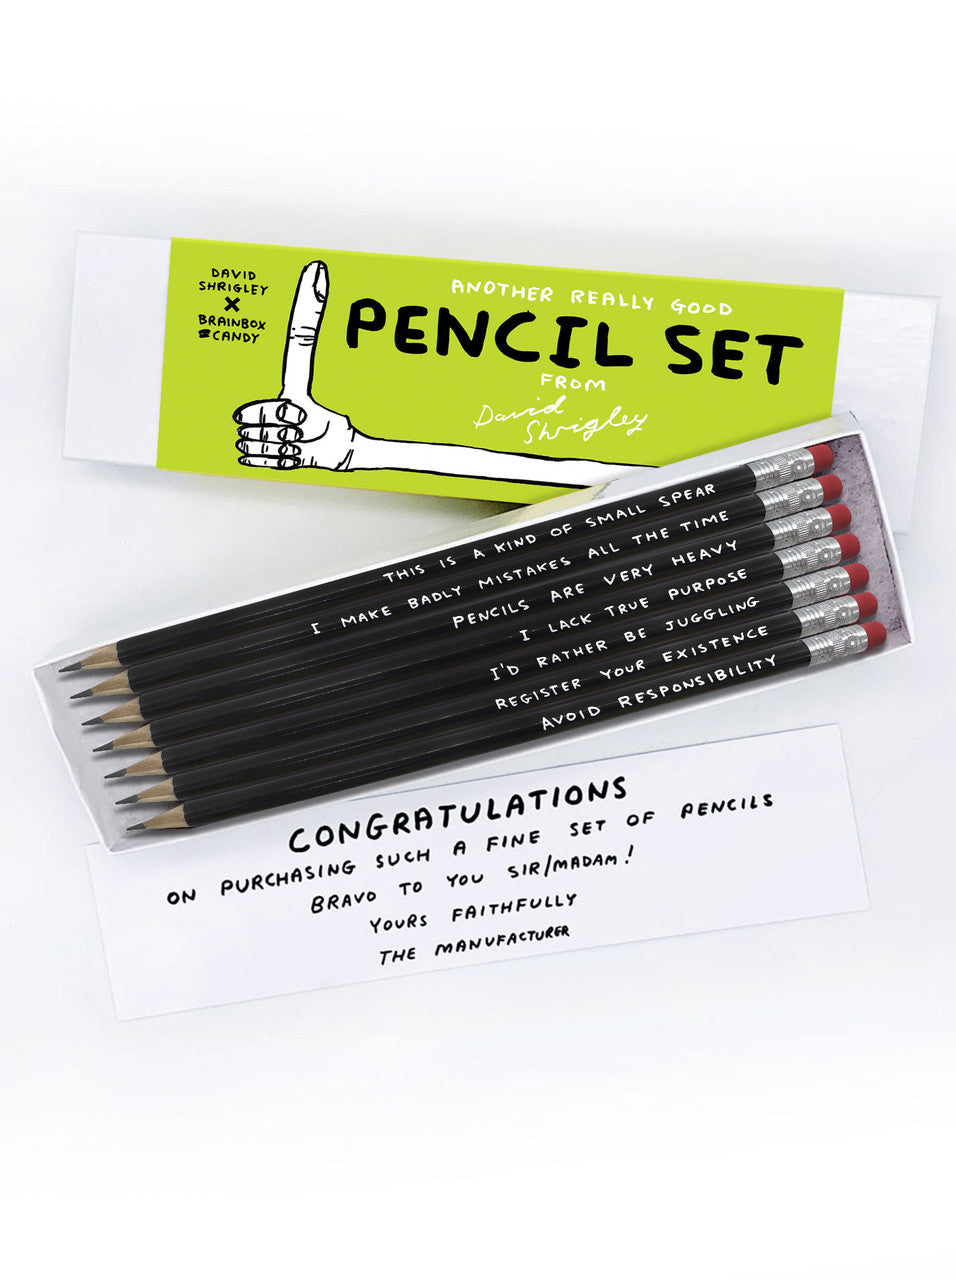 An image of a box of pencils by artist DAvid Shrigley. The box is white with a lime green card band to hold it together. It shows the name of the product and a thumbs up artwork. The pencils are black with white capital hand written words on each and they have a rubber at one end.